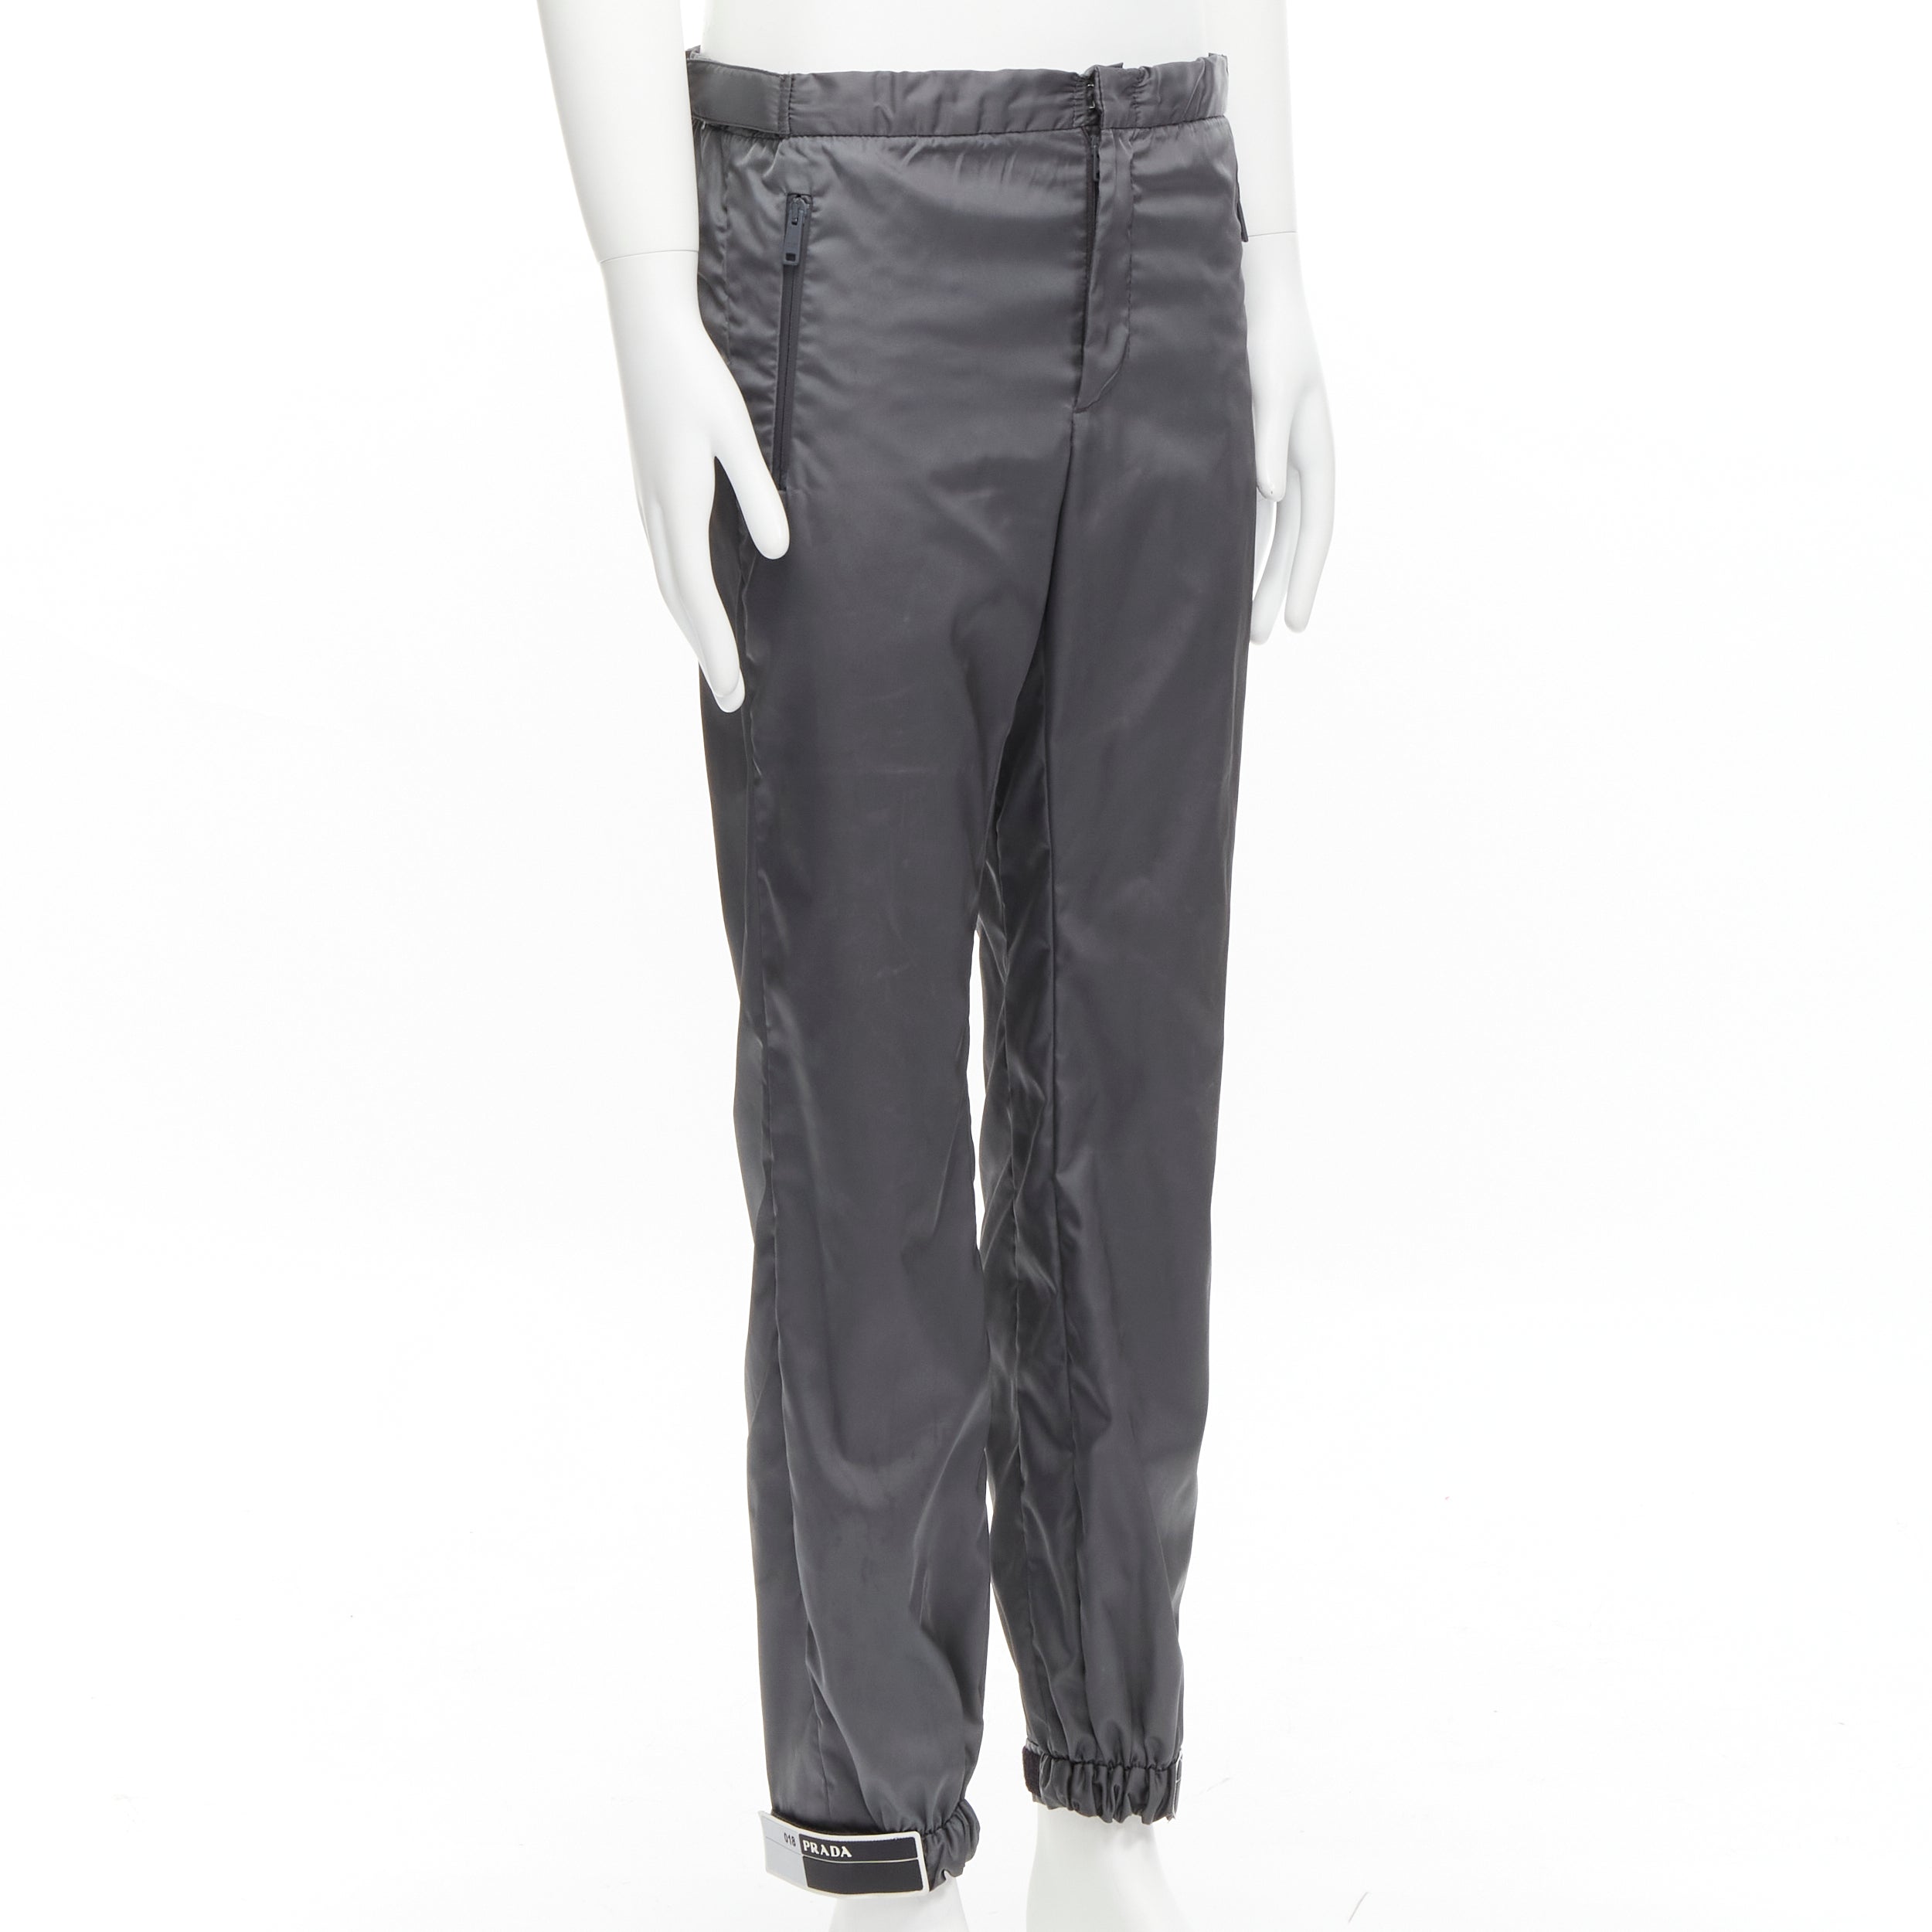 100% Authenticity Guaranteed Prada Grey Nylon Pants on Sale. Available at  JHROP jhrop_official